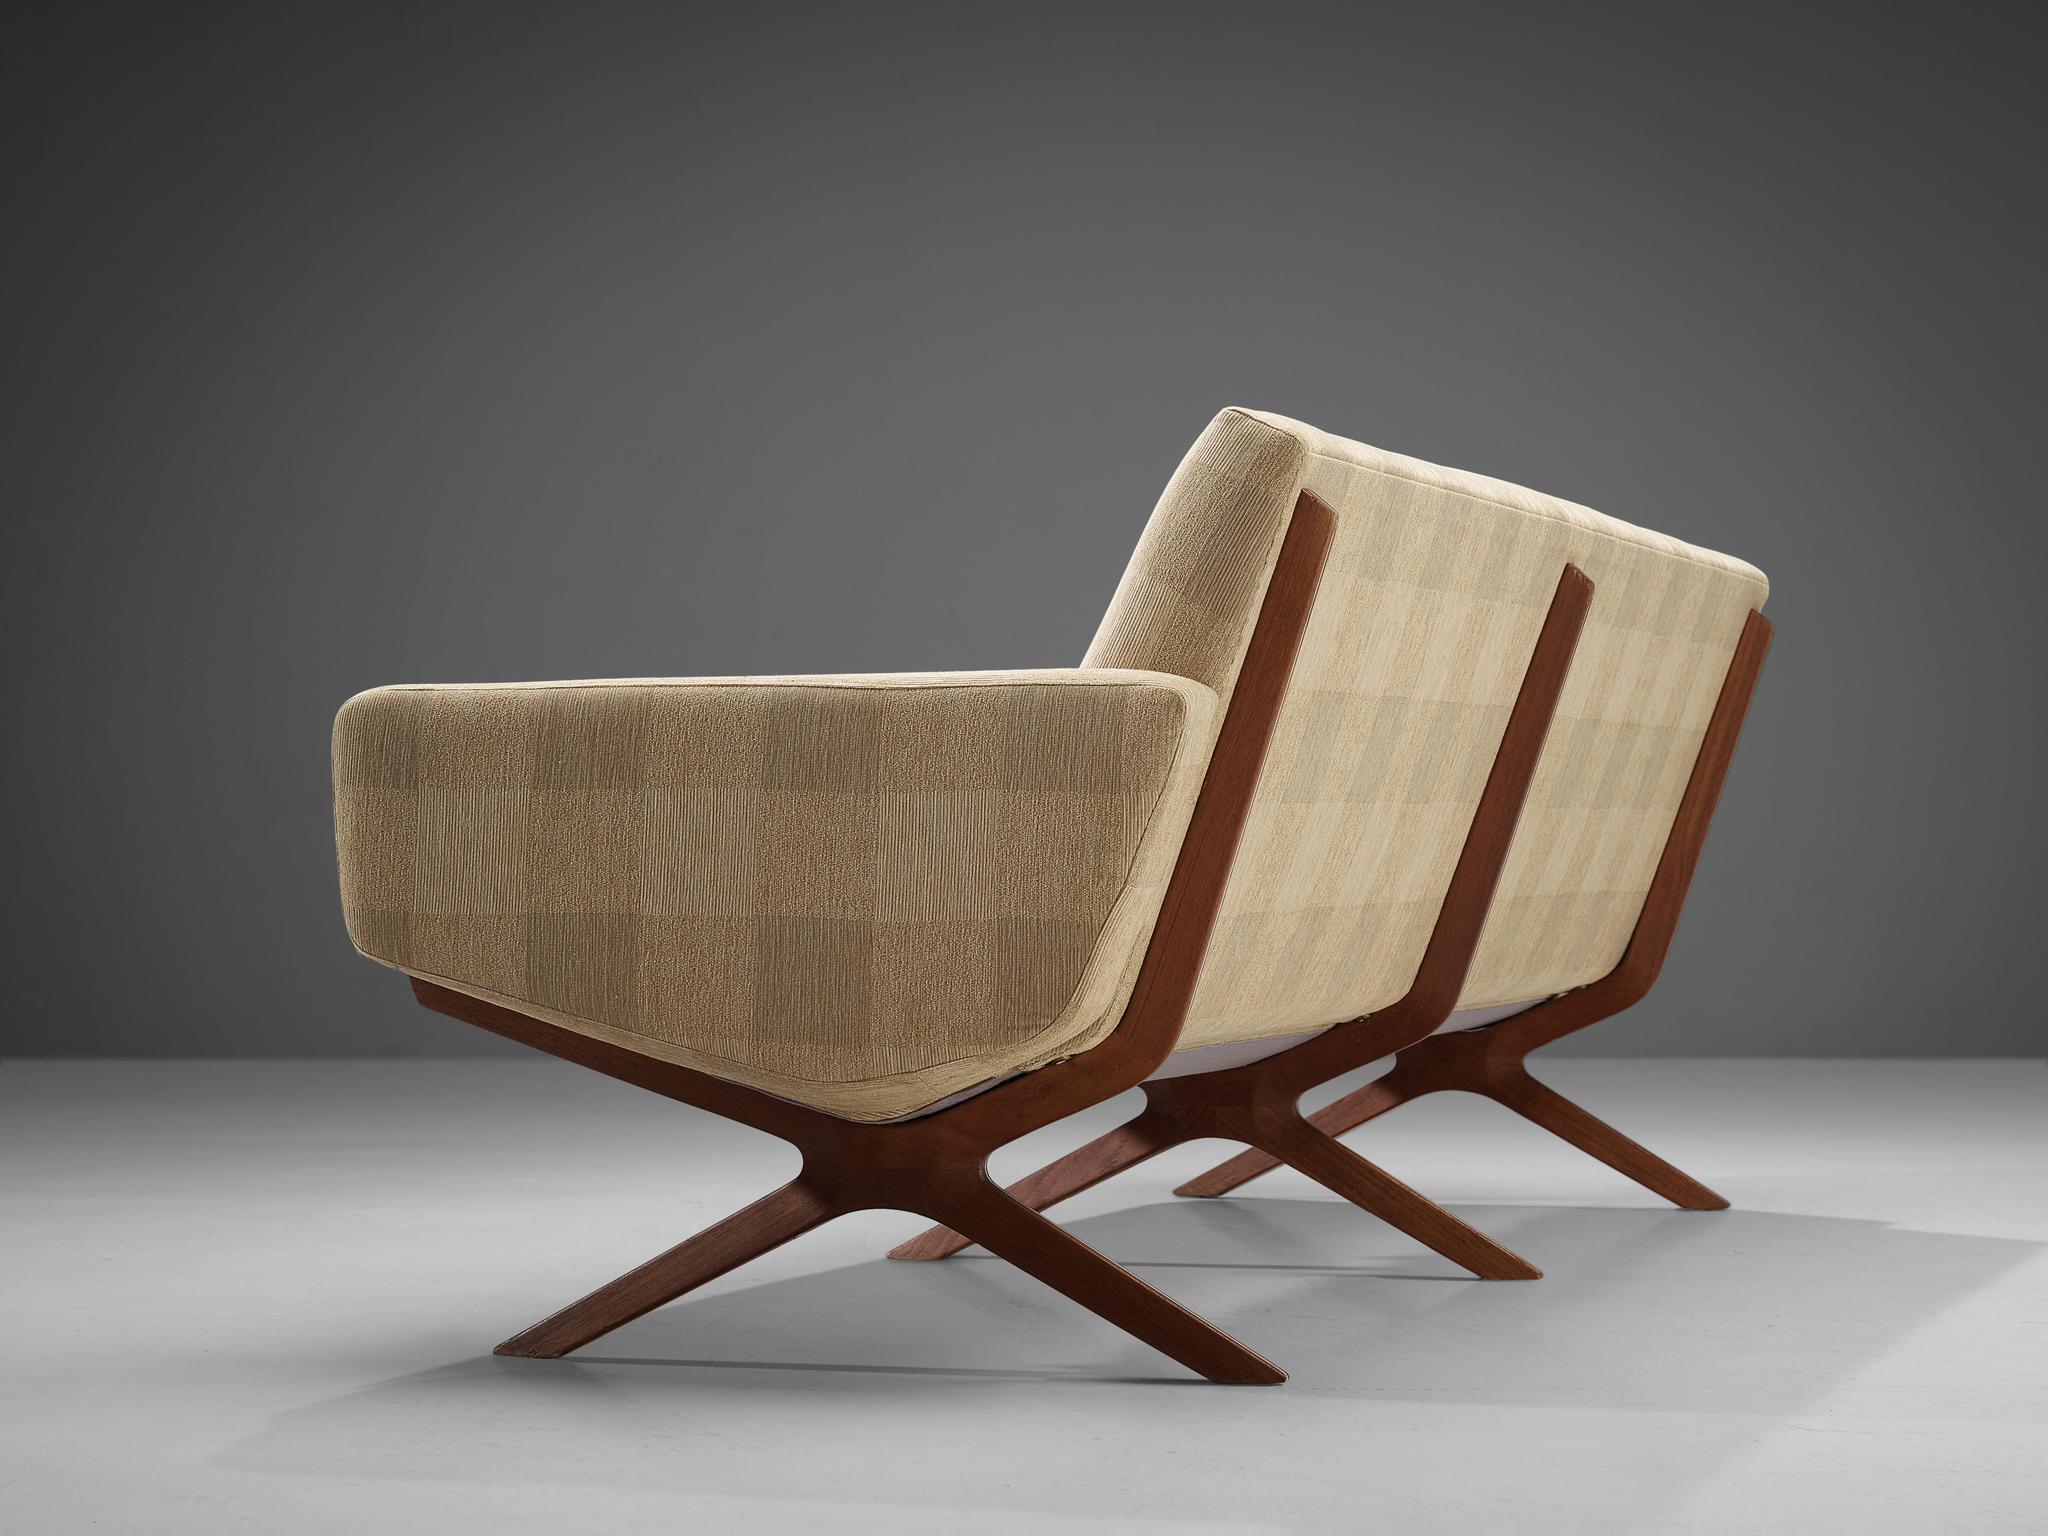 Peter Hvidt & Orla Mølgaard Nielsen, three-seat sofa, model 'Silverline', fabric, teak and metal, 1950s.

Comfortable sofa with an architectural design by Hvidt & Mølgaard. This model is called silverline, due to its aesthetic metal line in the